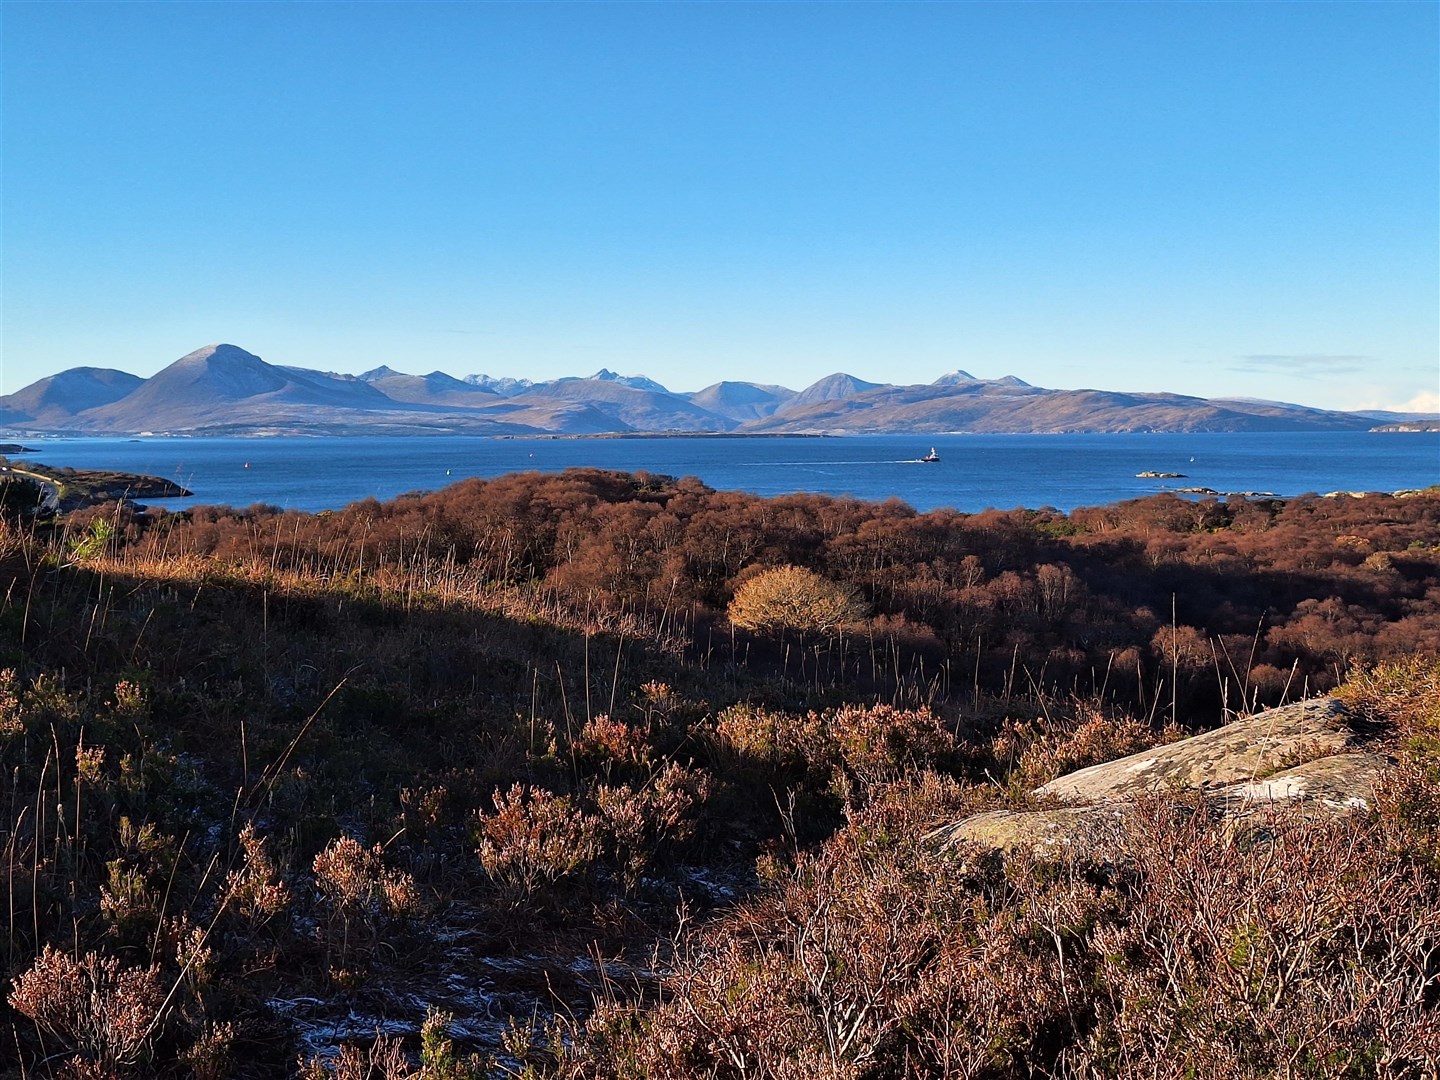 The view to Skye from a walk around The Plock at Kyle of Lochalsh.